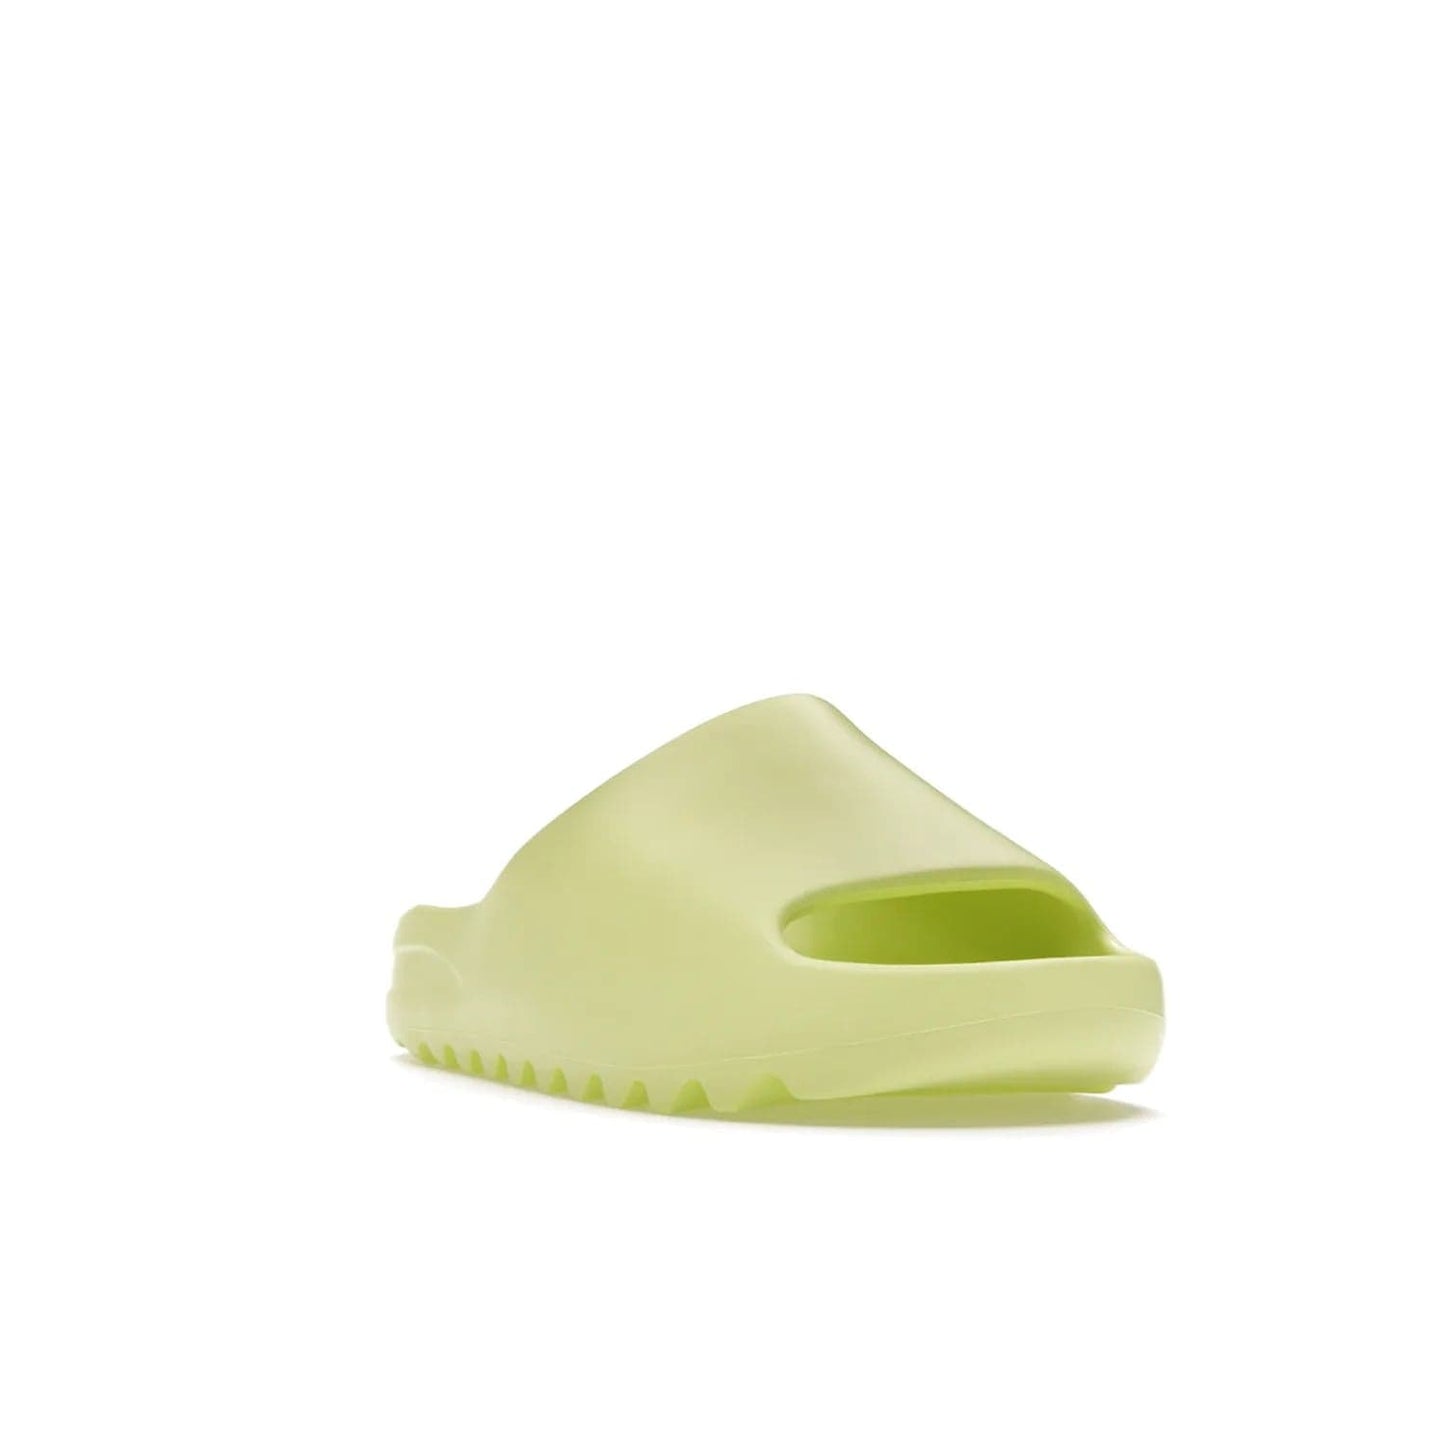 adidas Yeezy Slide Glow Green - Image 7 - Only at www.BallersClubKickz.com - Experience an unexpected summer style with the adidas Yeezy Slide Glow Green. This limited edition slide sandal provides a lightweight and durable construction and a bold Glow Green hue. Strategic grooves enhance traction and provide all-day comfort. Make a statement with the adidas Yeezy Slide Glow Green.